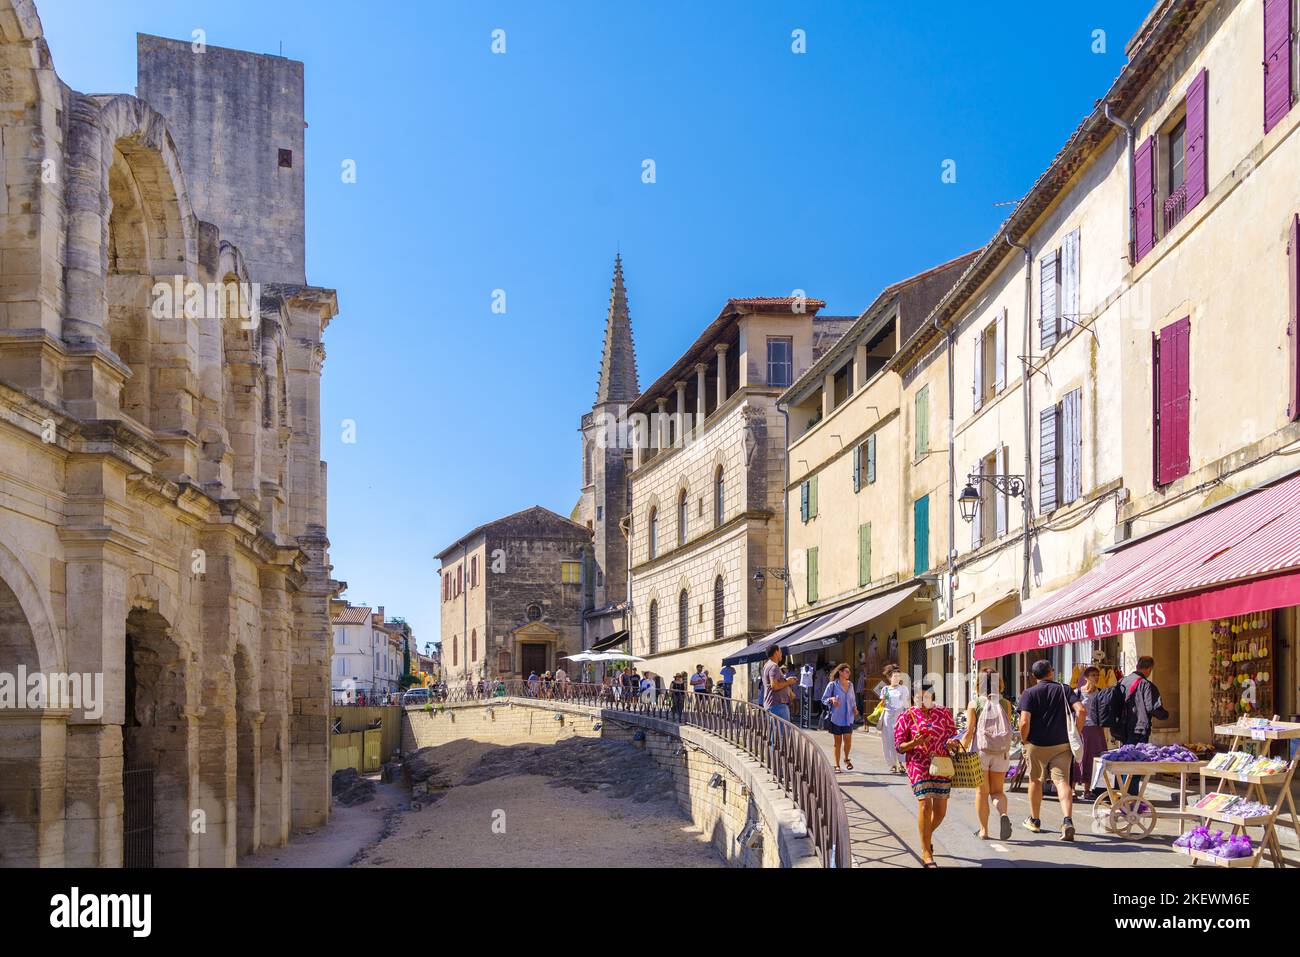 ARLES, FRANCE - AUGUST 6, 2022: Historic city center with the amphitheatre on the left Stock Photo